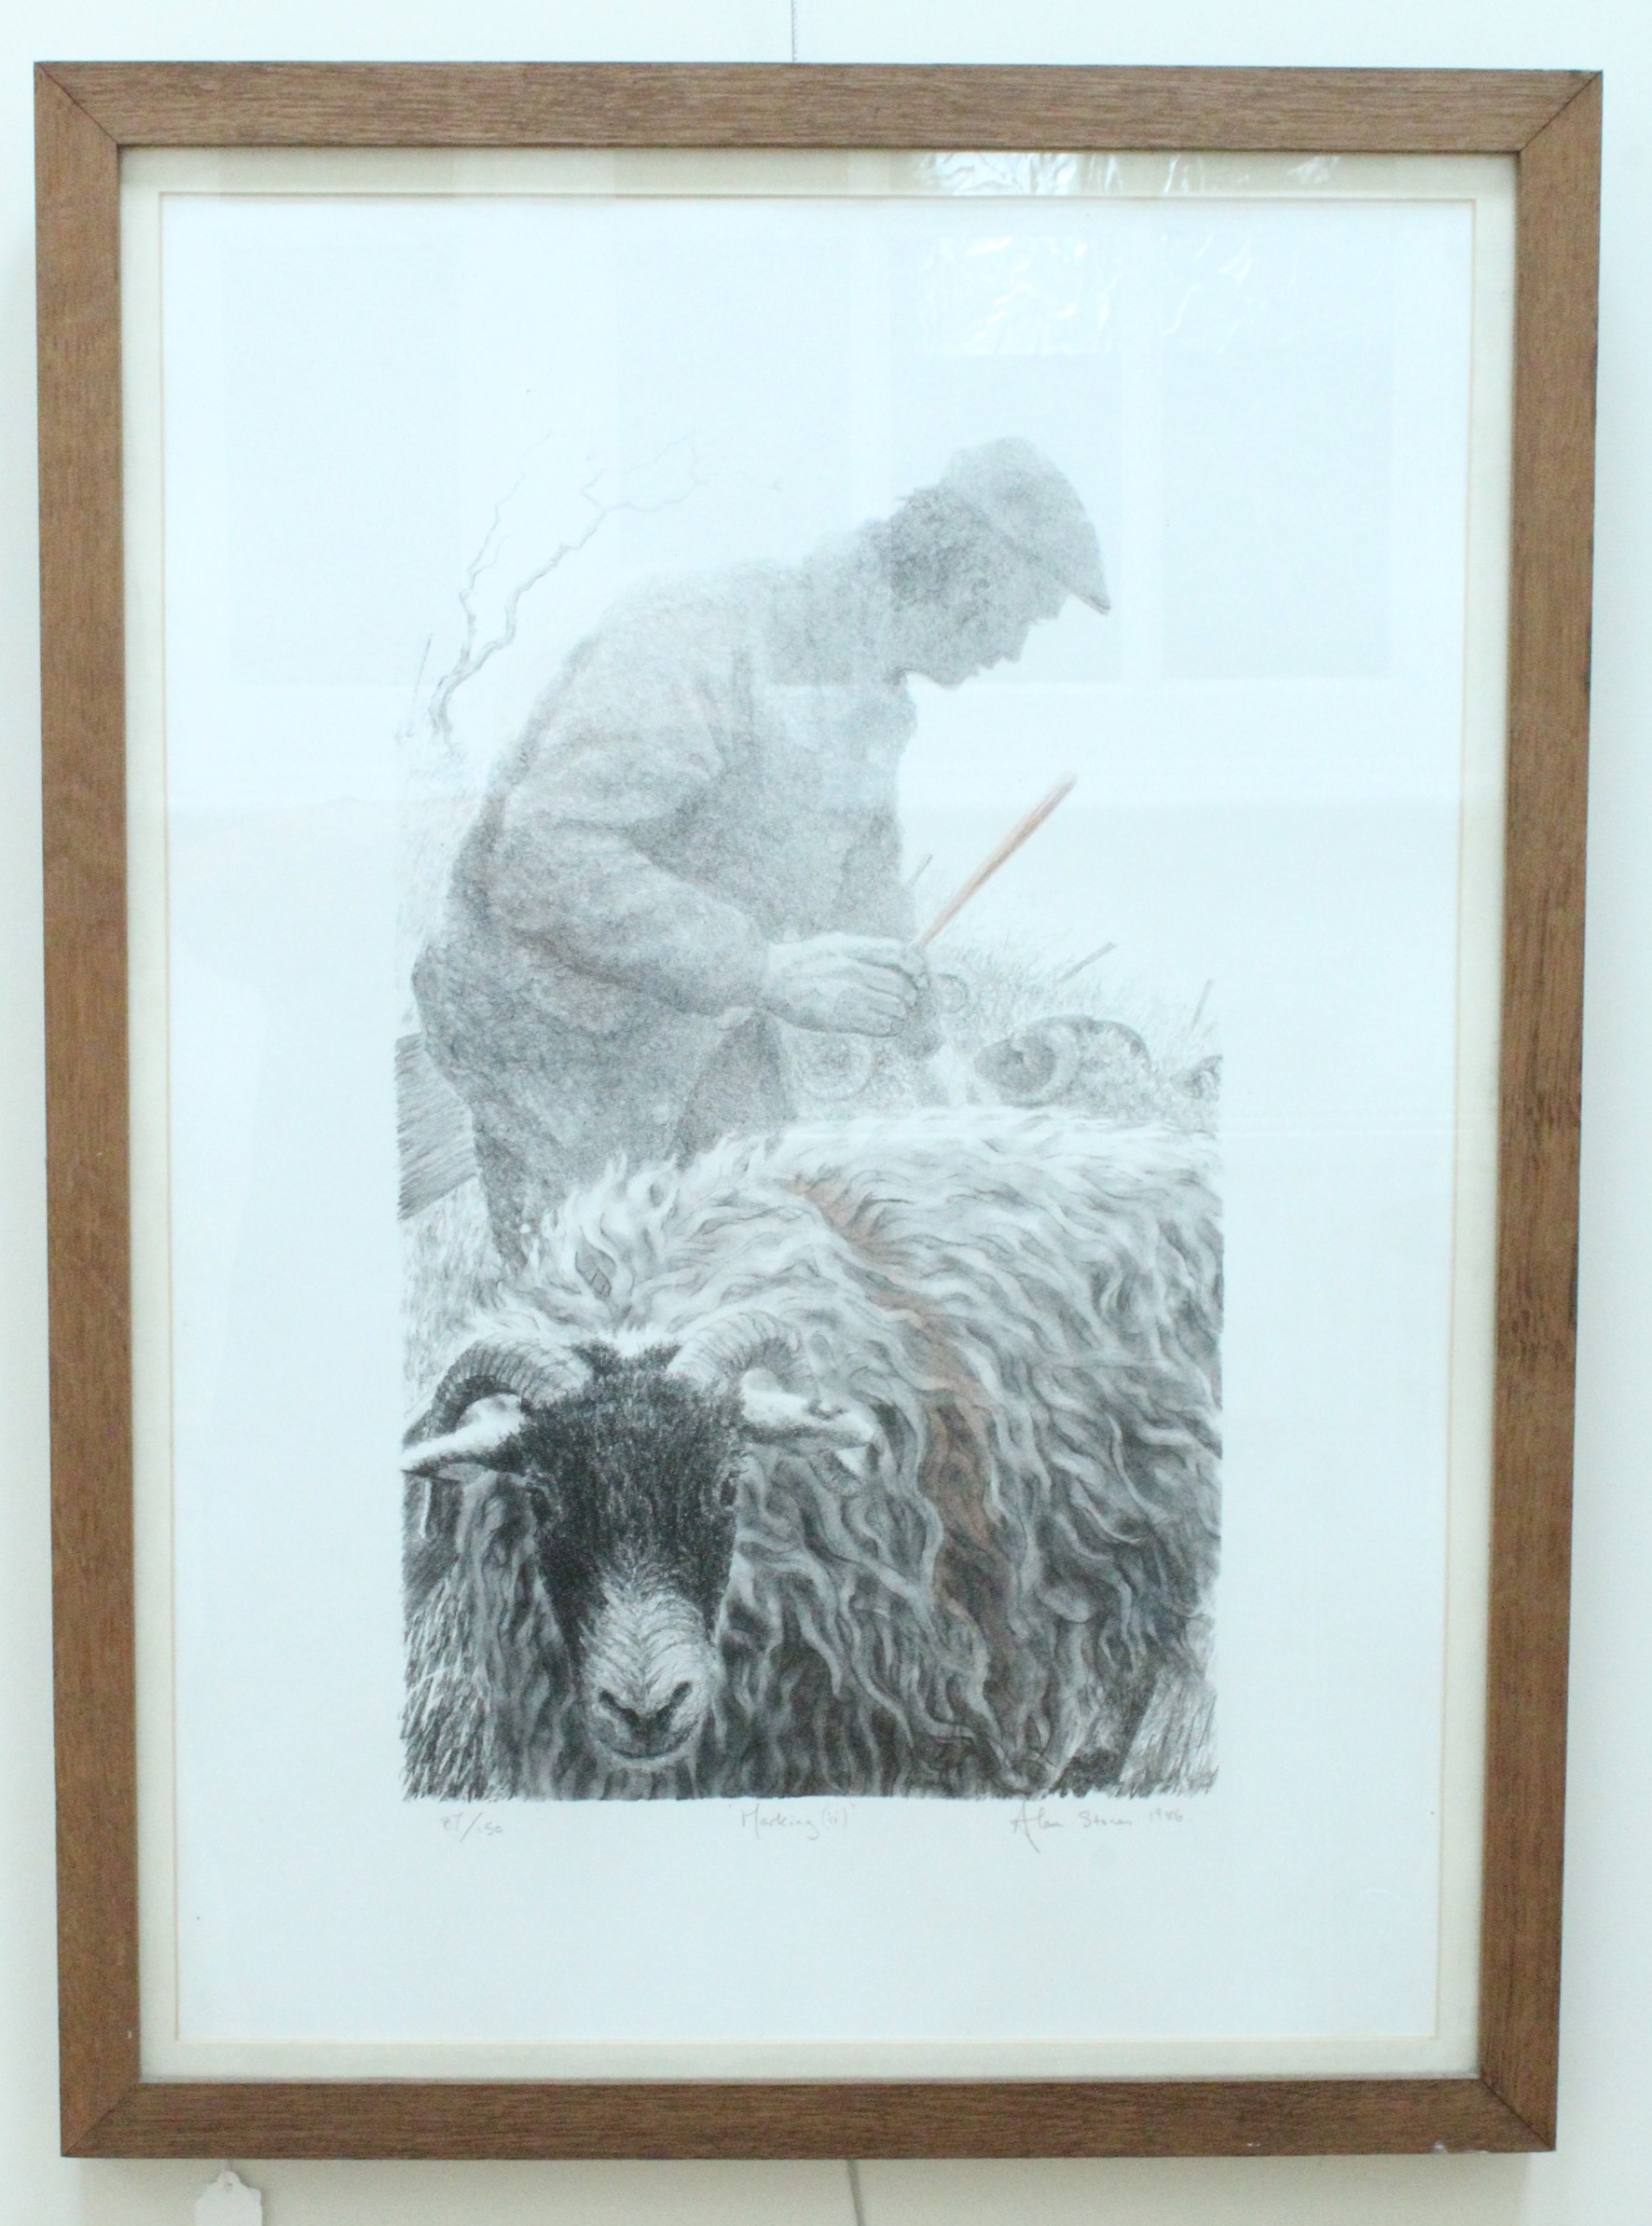 Alan Stones (contemporary, Cumbria) "Marking (ii)", limited edition lithograph, 87 / 150, signed and